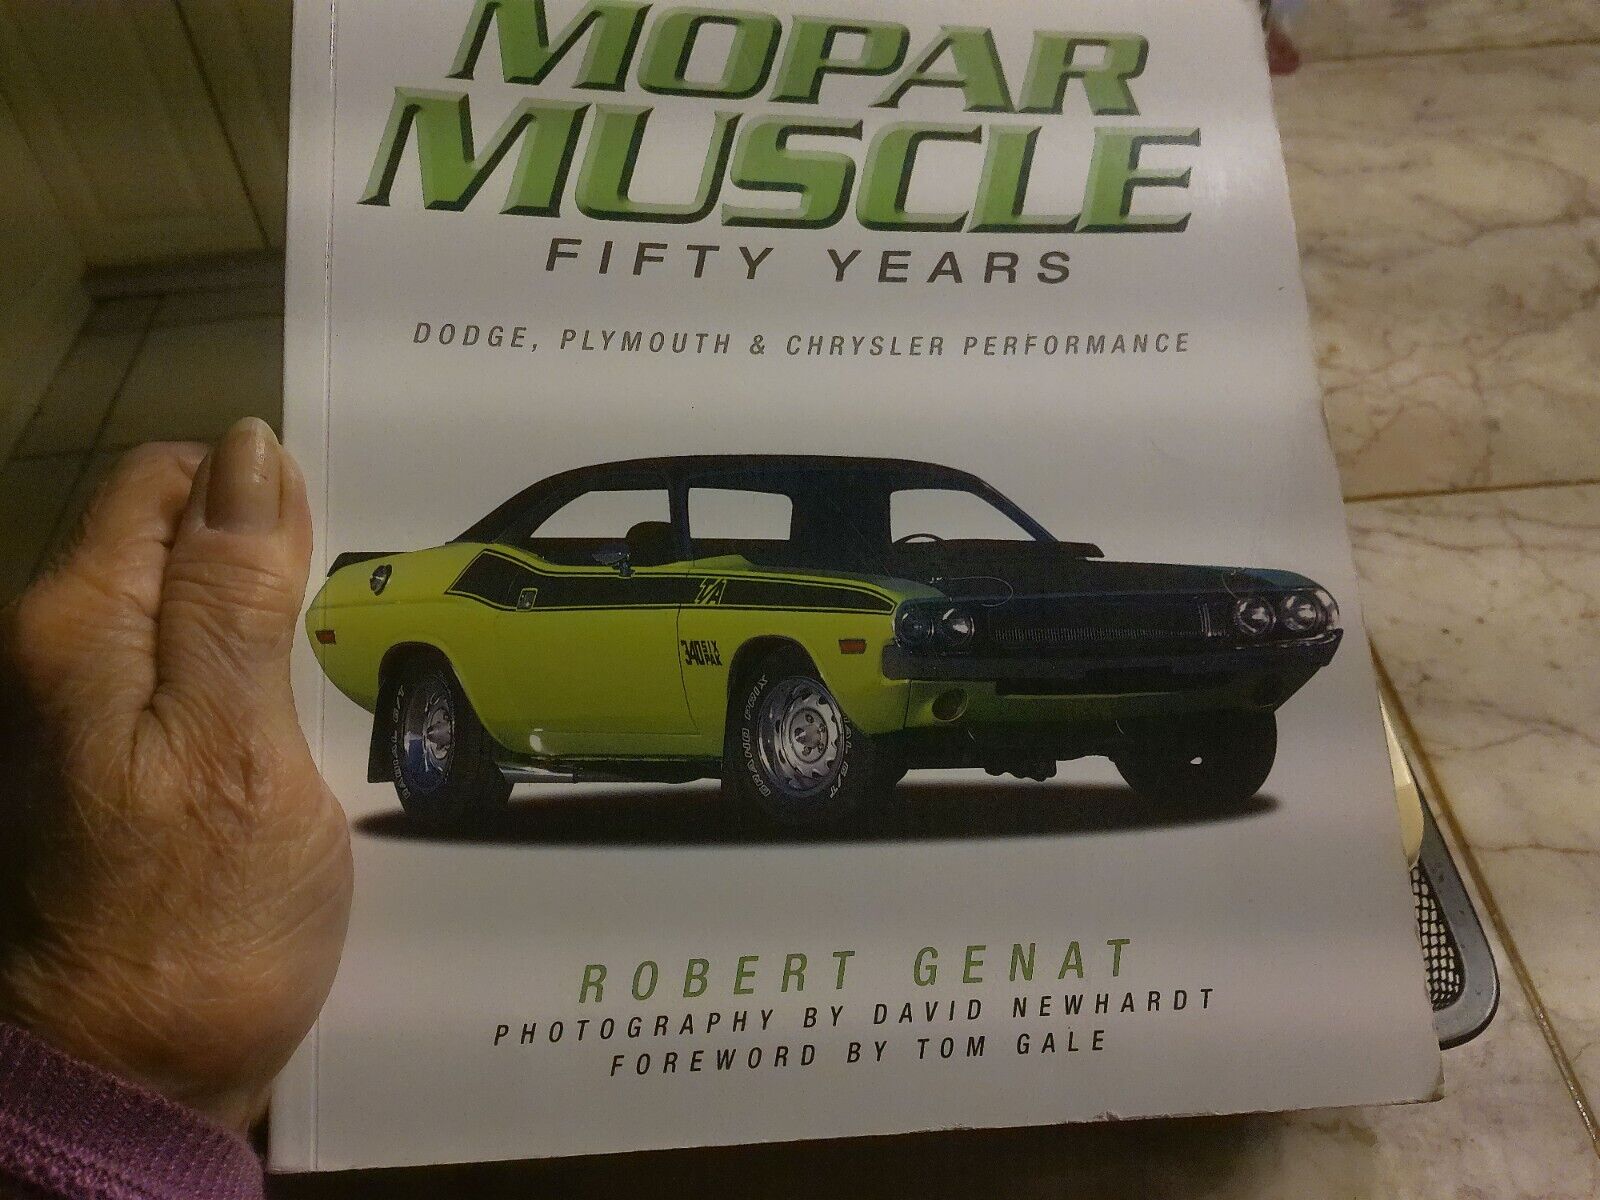 Mopar Muscle Fifty Years Dodge, Plymouth & Chrysler Performance